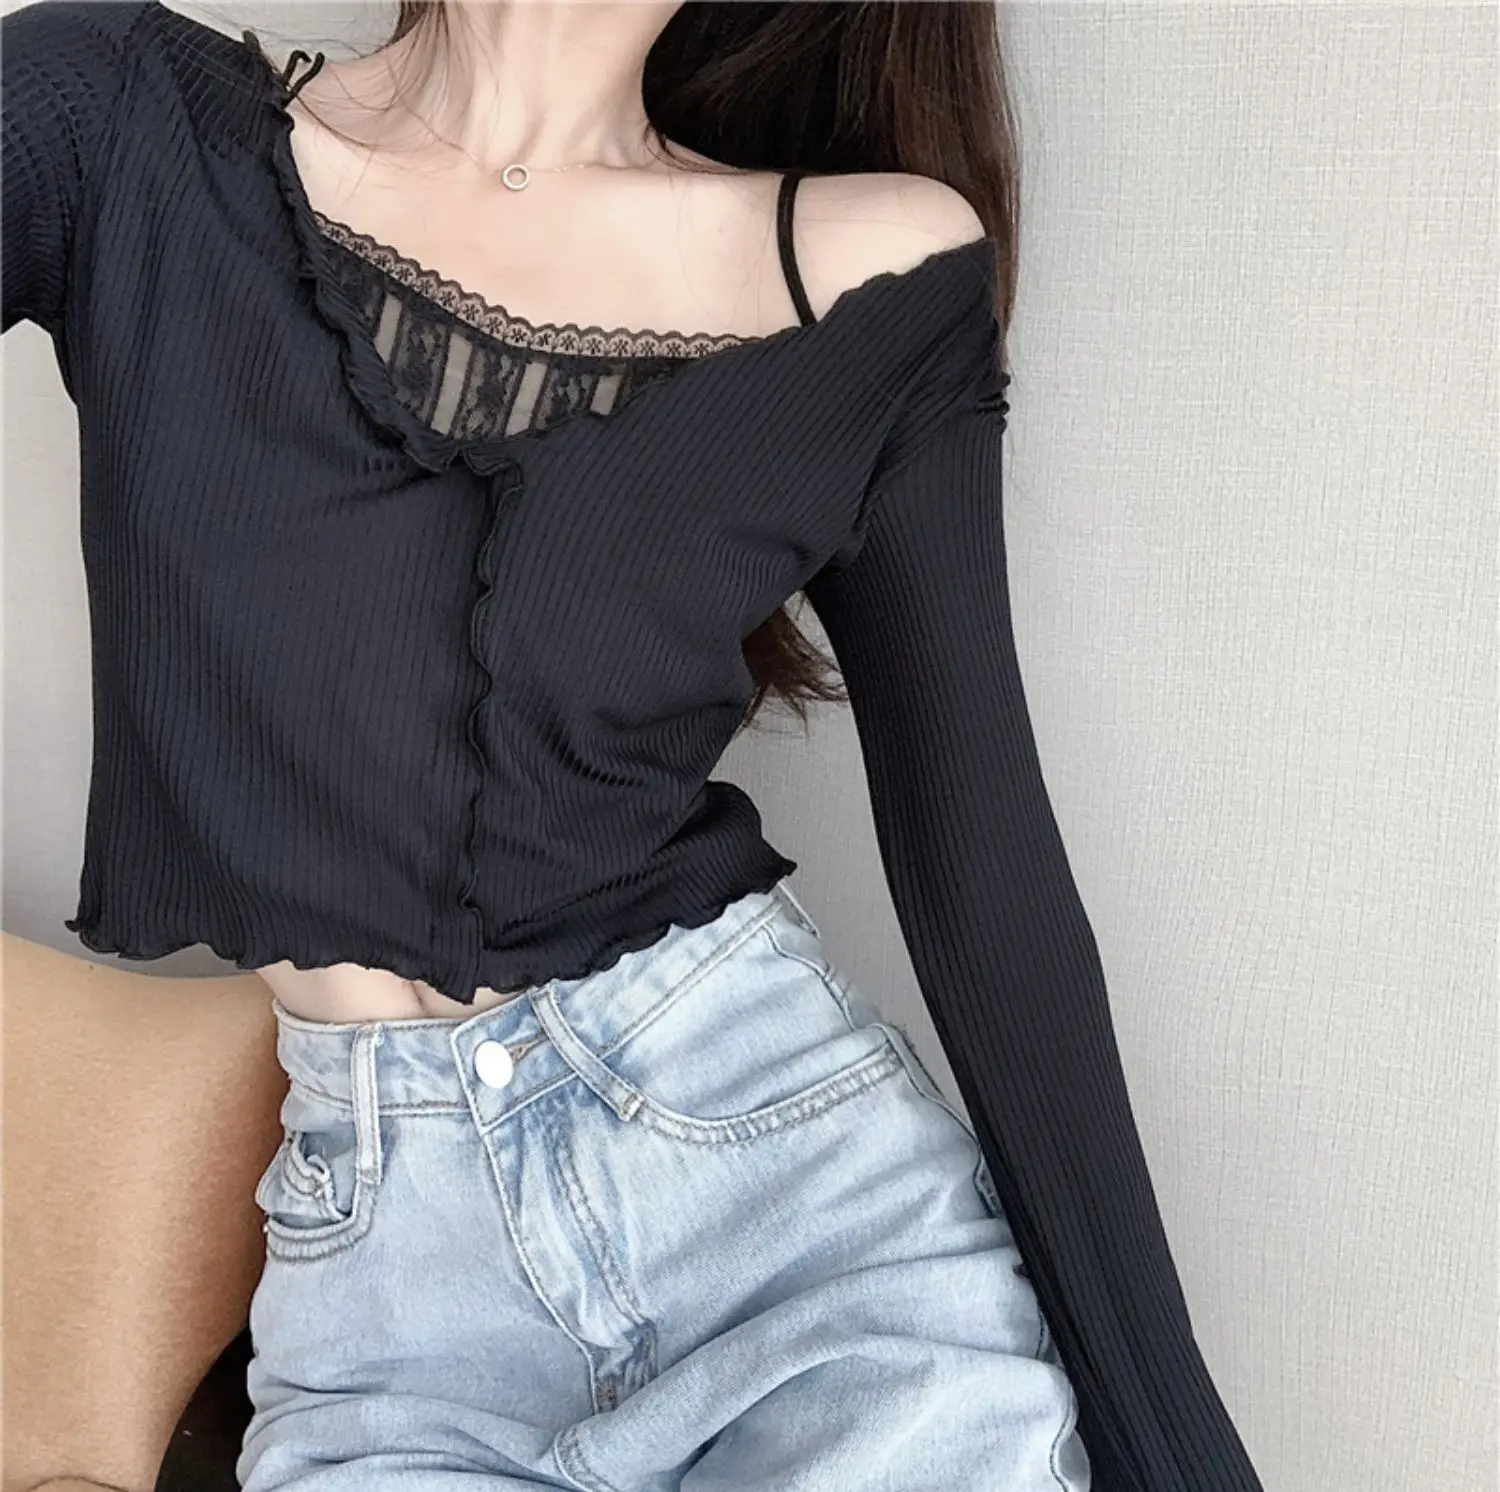 

Women's Autumn Splicing Sexy Off Shoulder Bottoming T-shirts White Lace Fake Two Piece Elegant Suspender Short Tops Long Sleeve